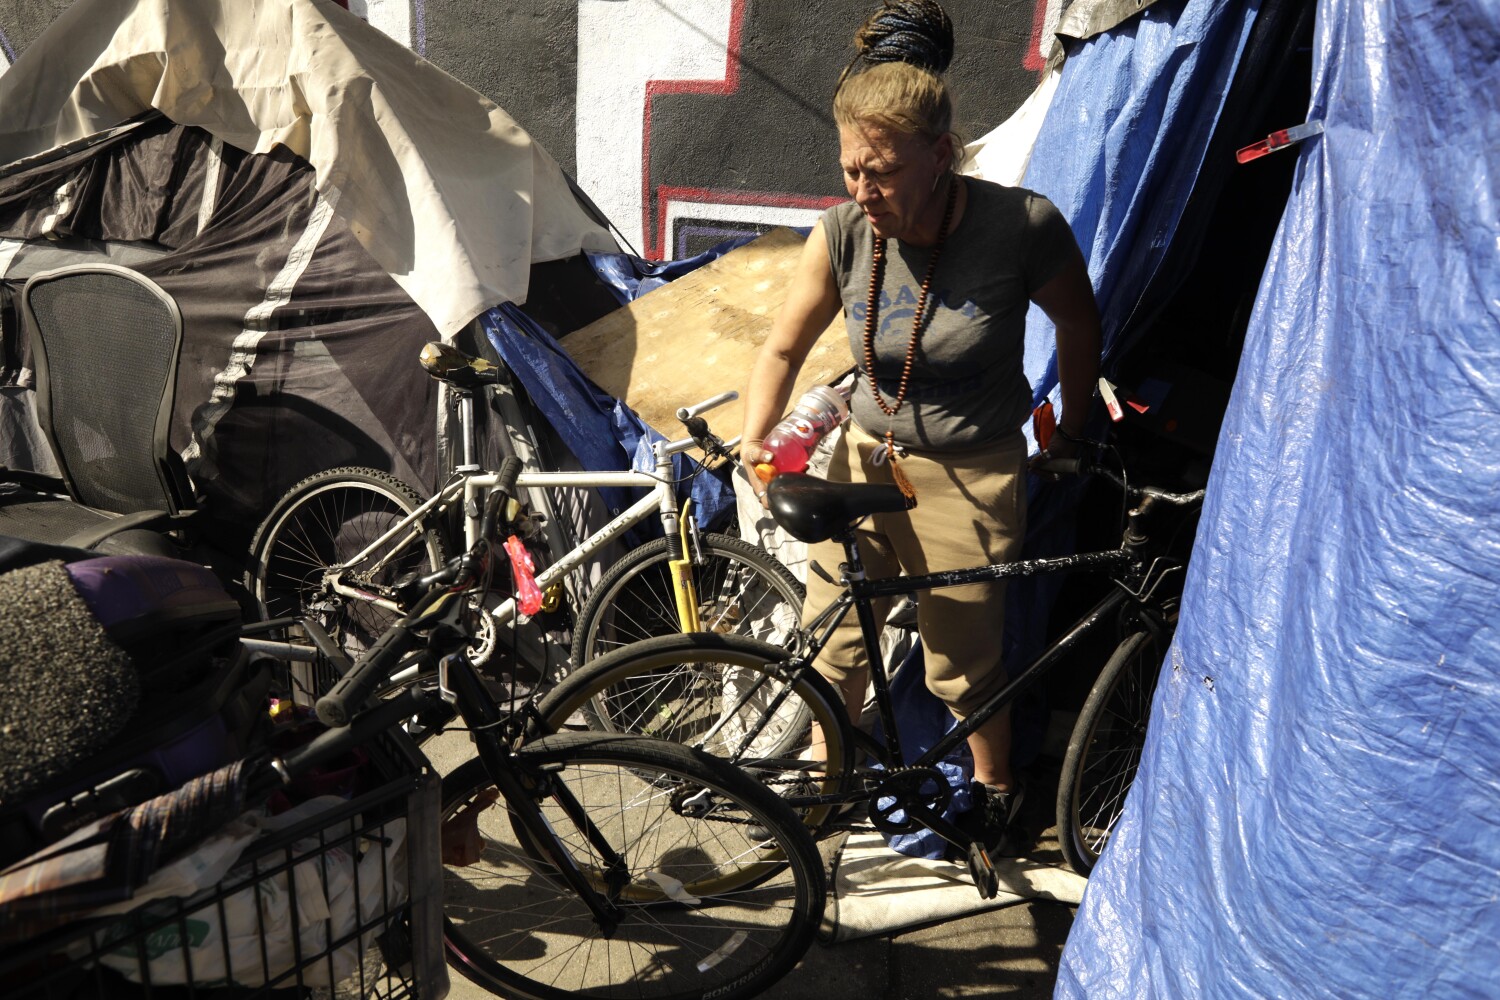 L.A. council votes to ban dismantling, selling bicycles on streets amid crime concerns